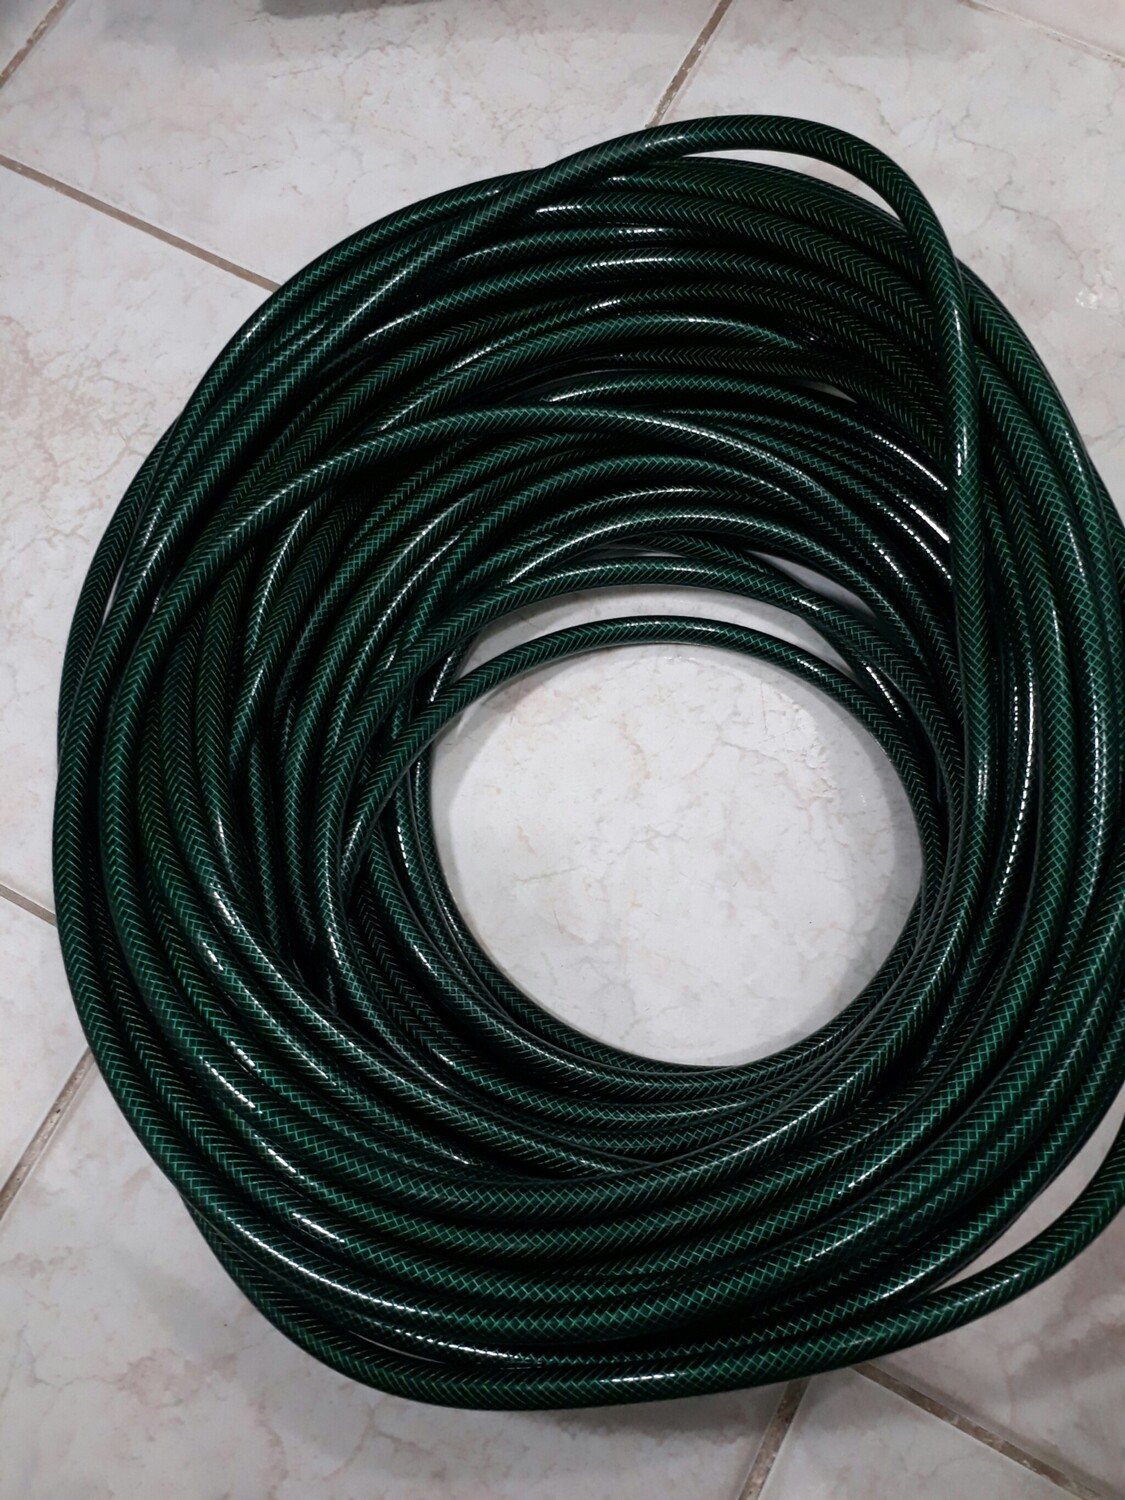 Homeaid 3 ply Classic Hose 1 meter